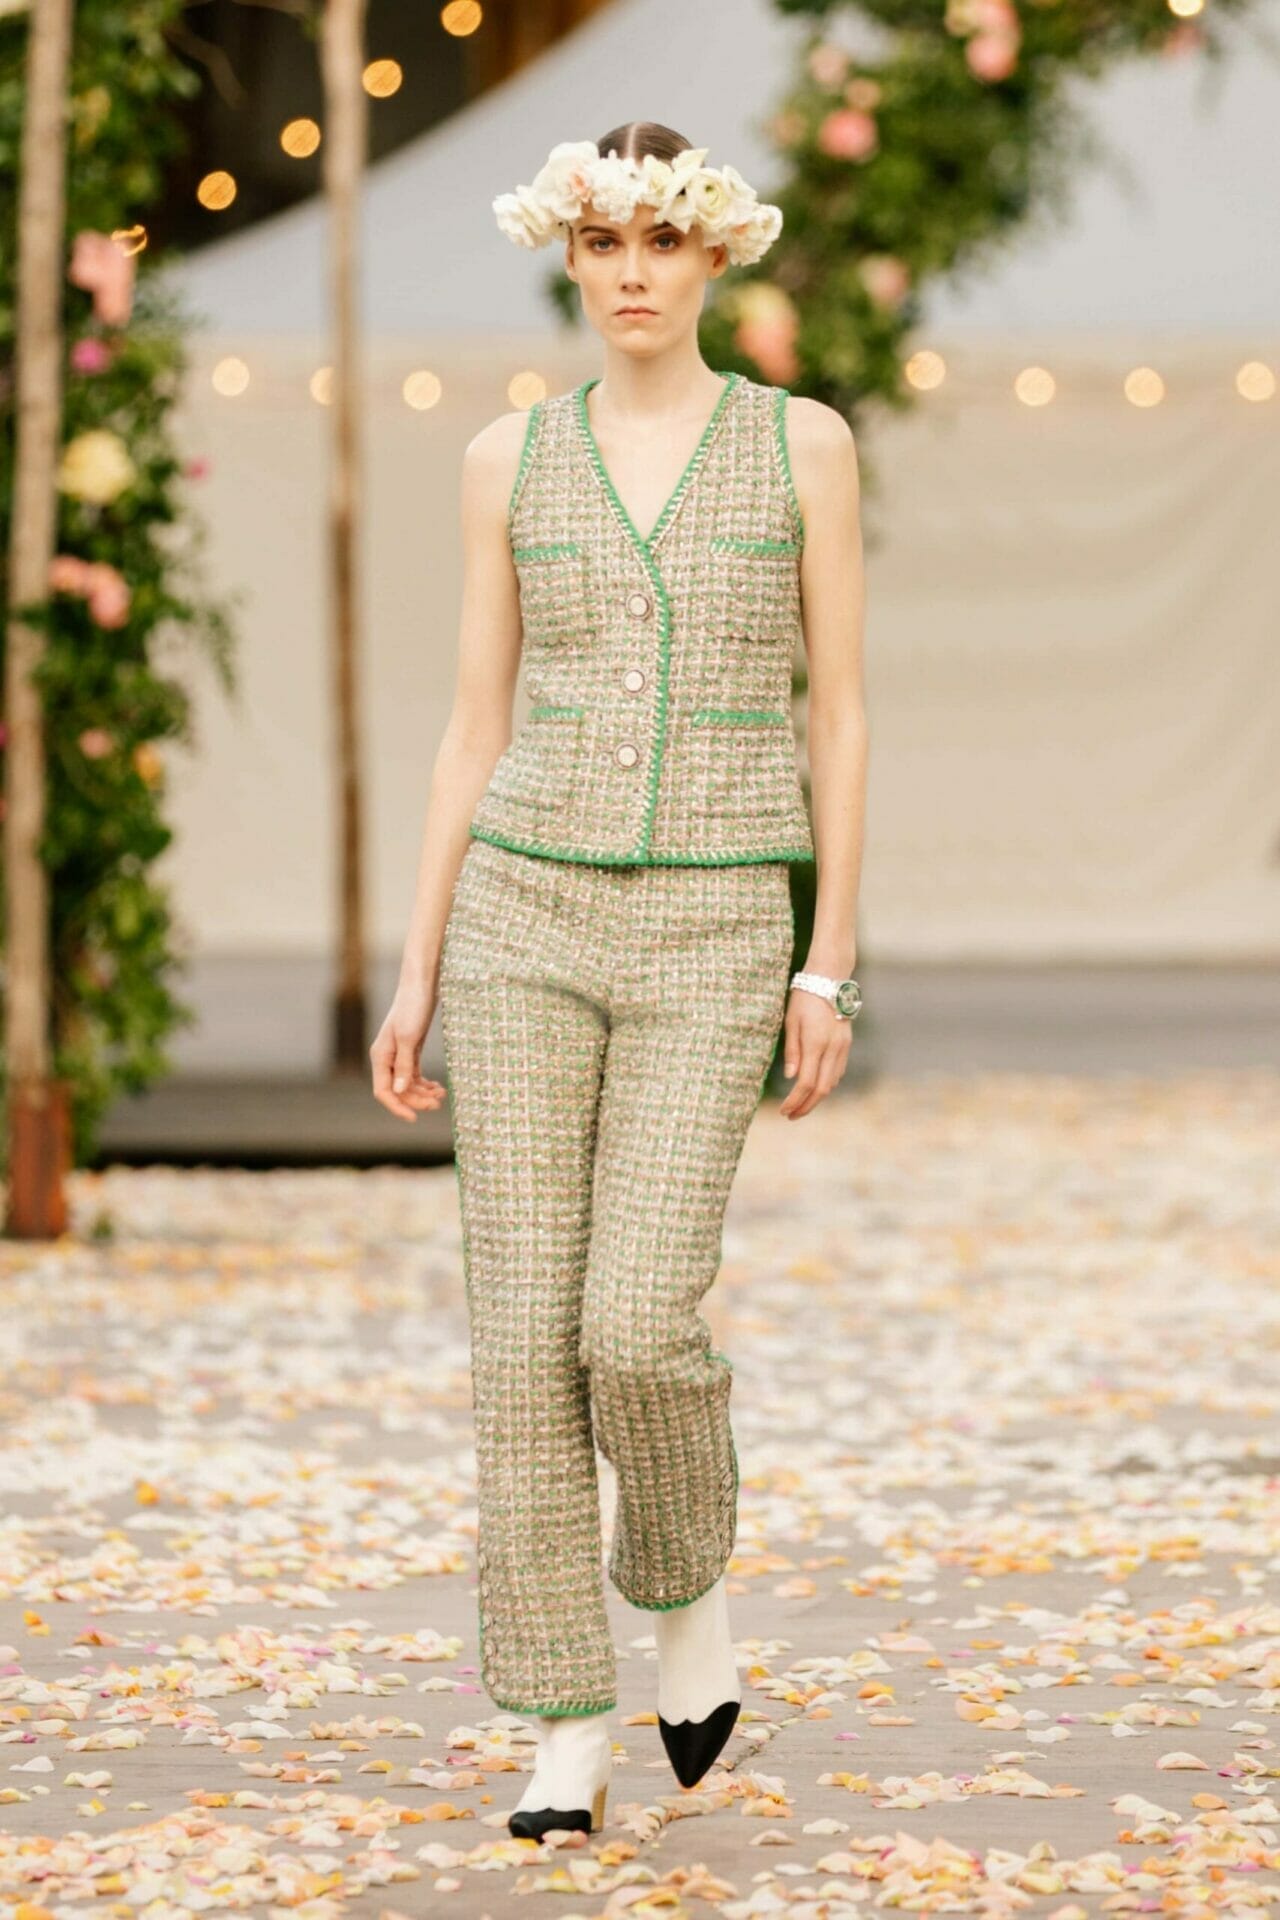 Chanel Haute Couture Spring Summer 2021 - RUNWAY MAGAZINE